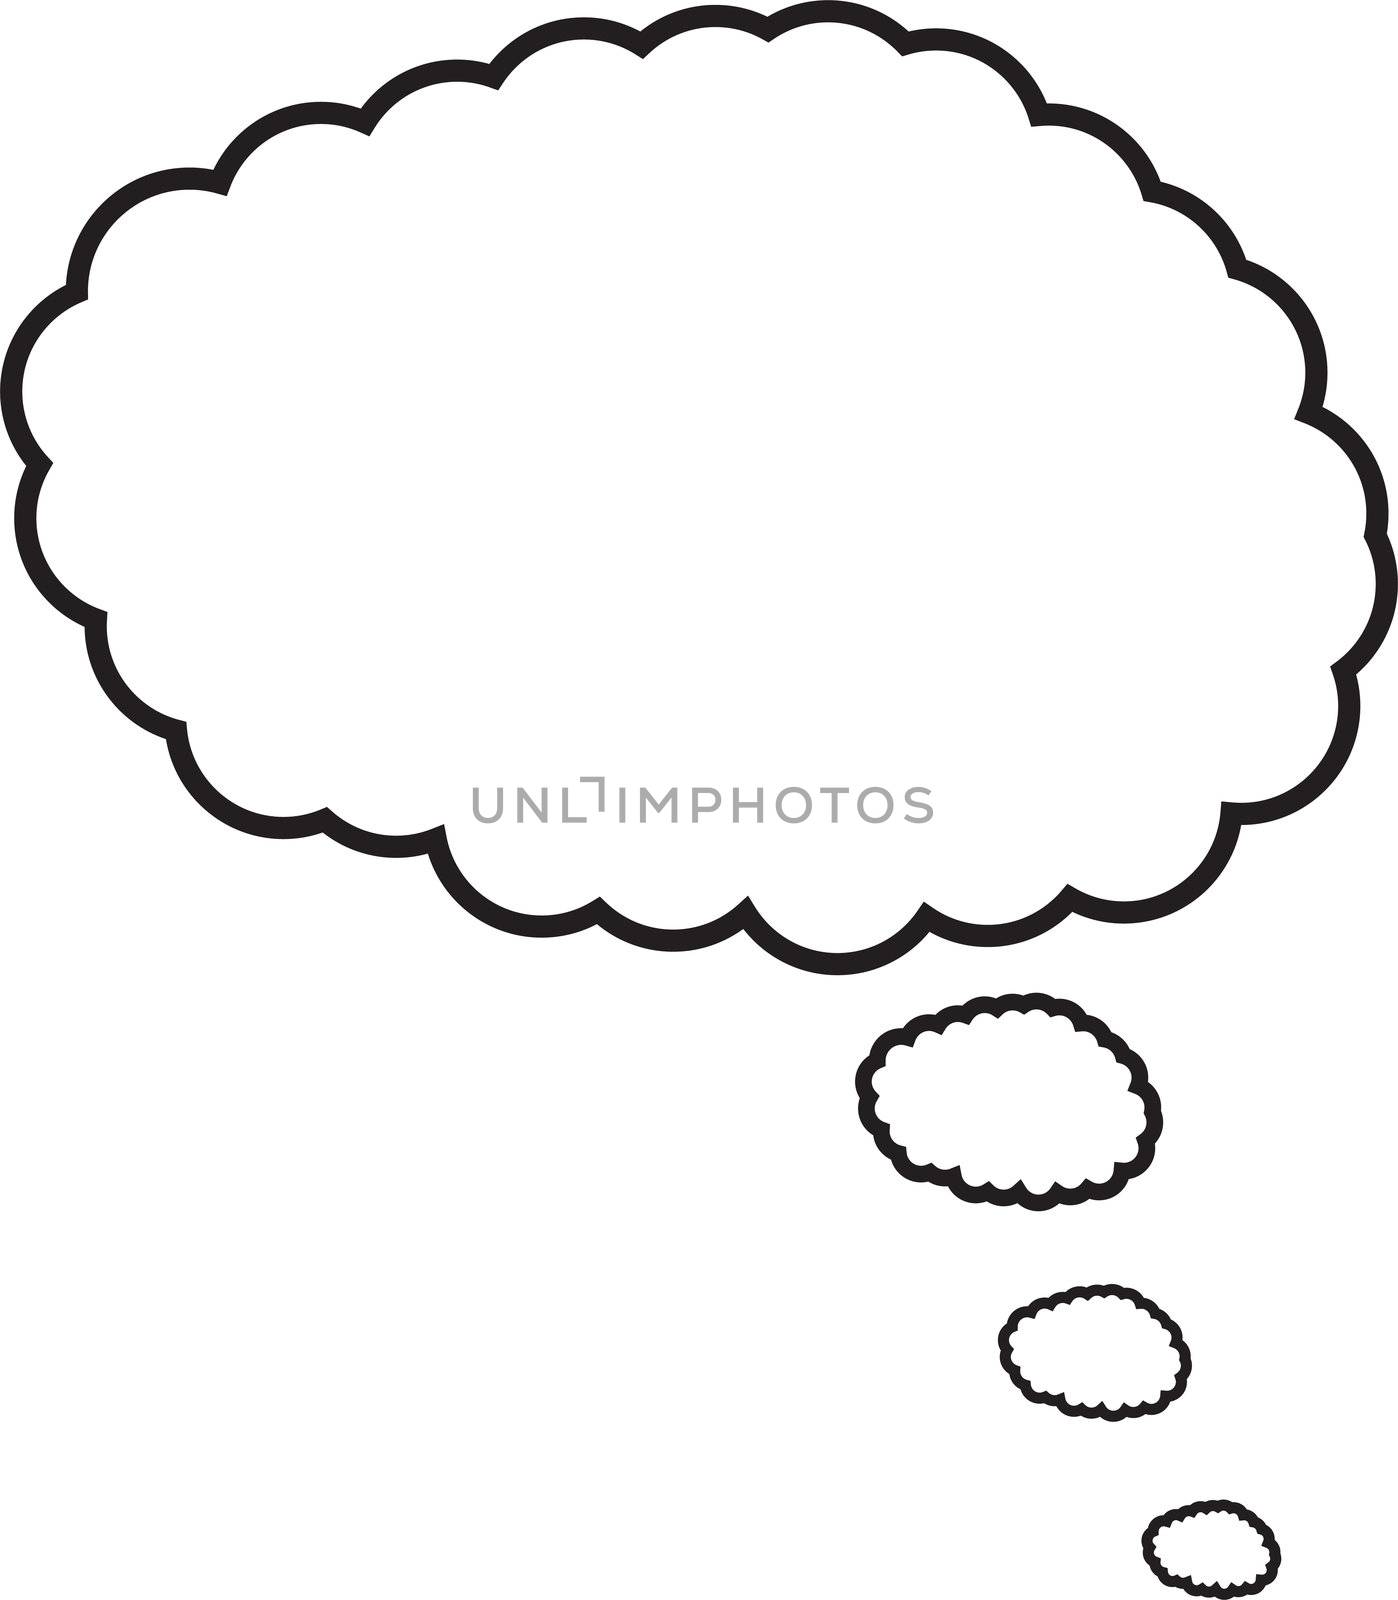 Thought or speech bubble. Could be used as a text space or in a comic strip